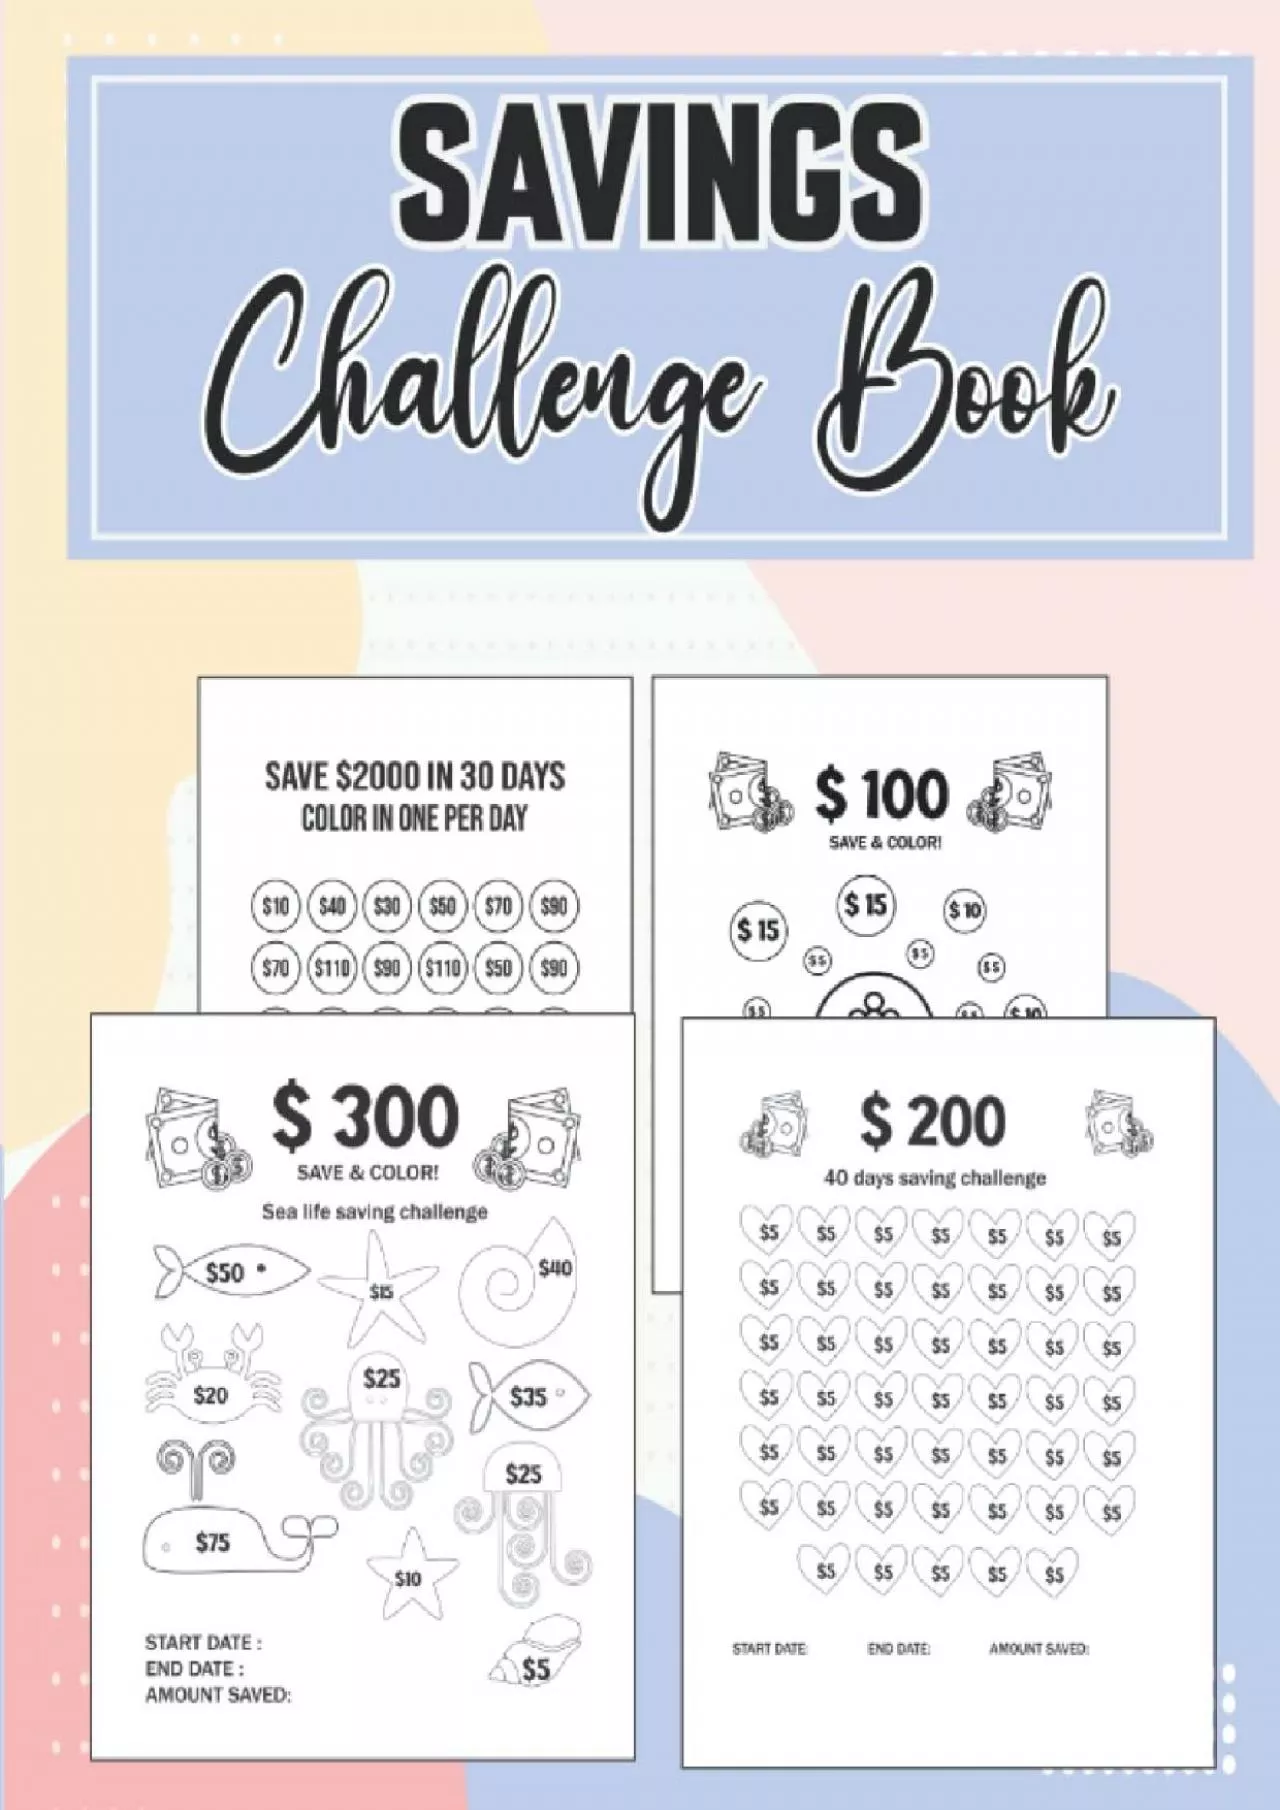 Low Income Savings Challenge Book: Easy Mini Cash Budget $1000 or Less or More Savings